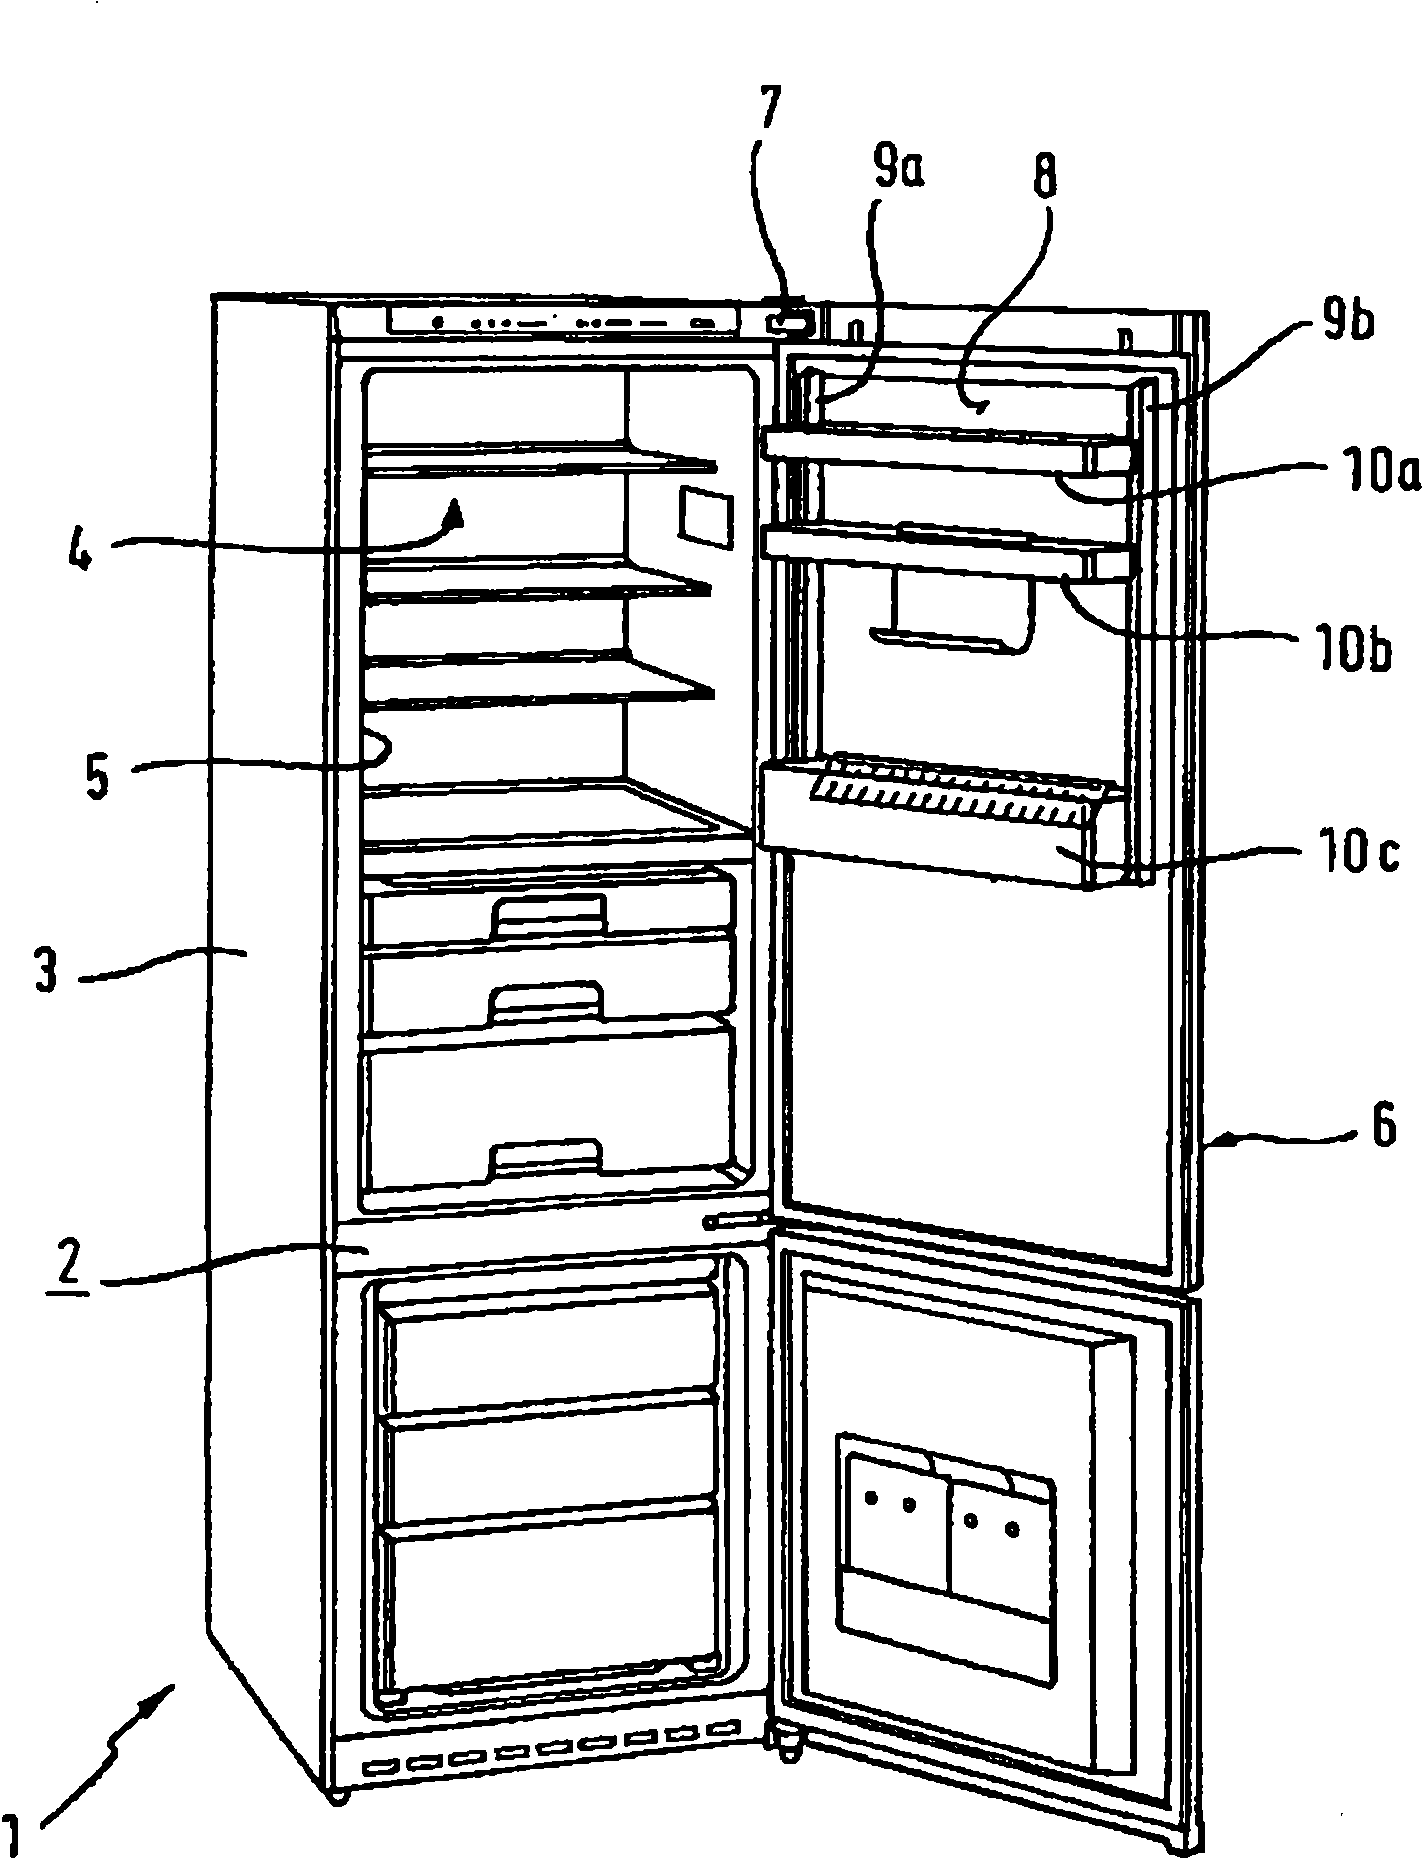 Refrigerator and associated two-piece detent means arrangement